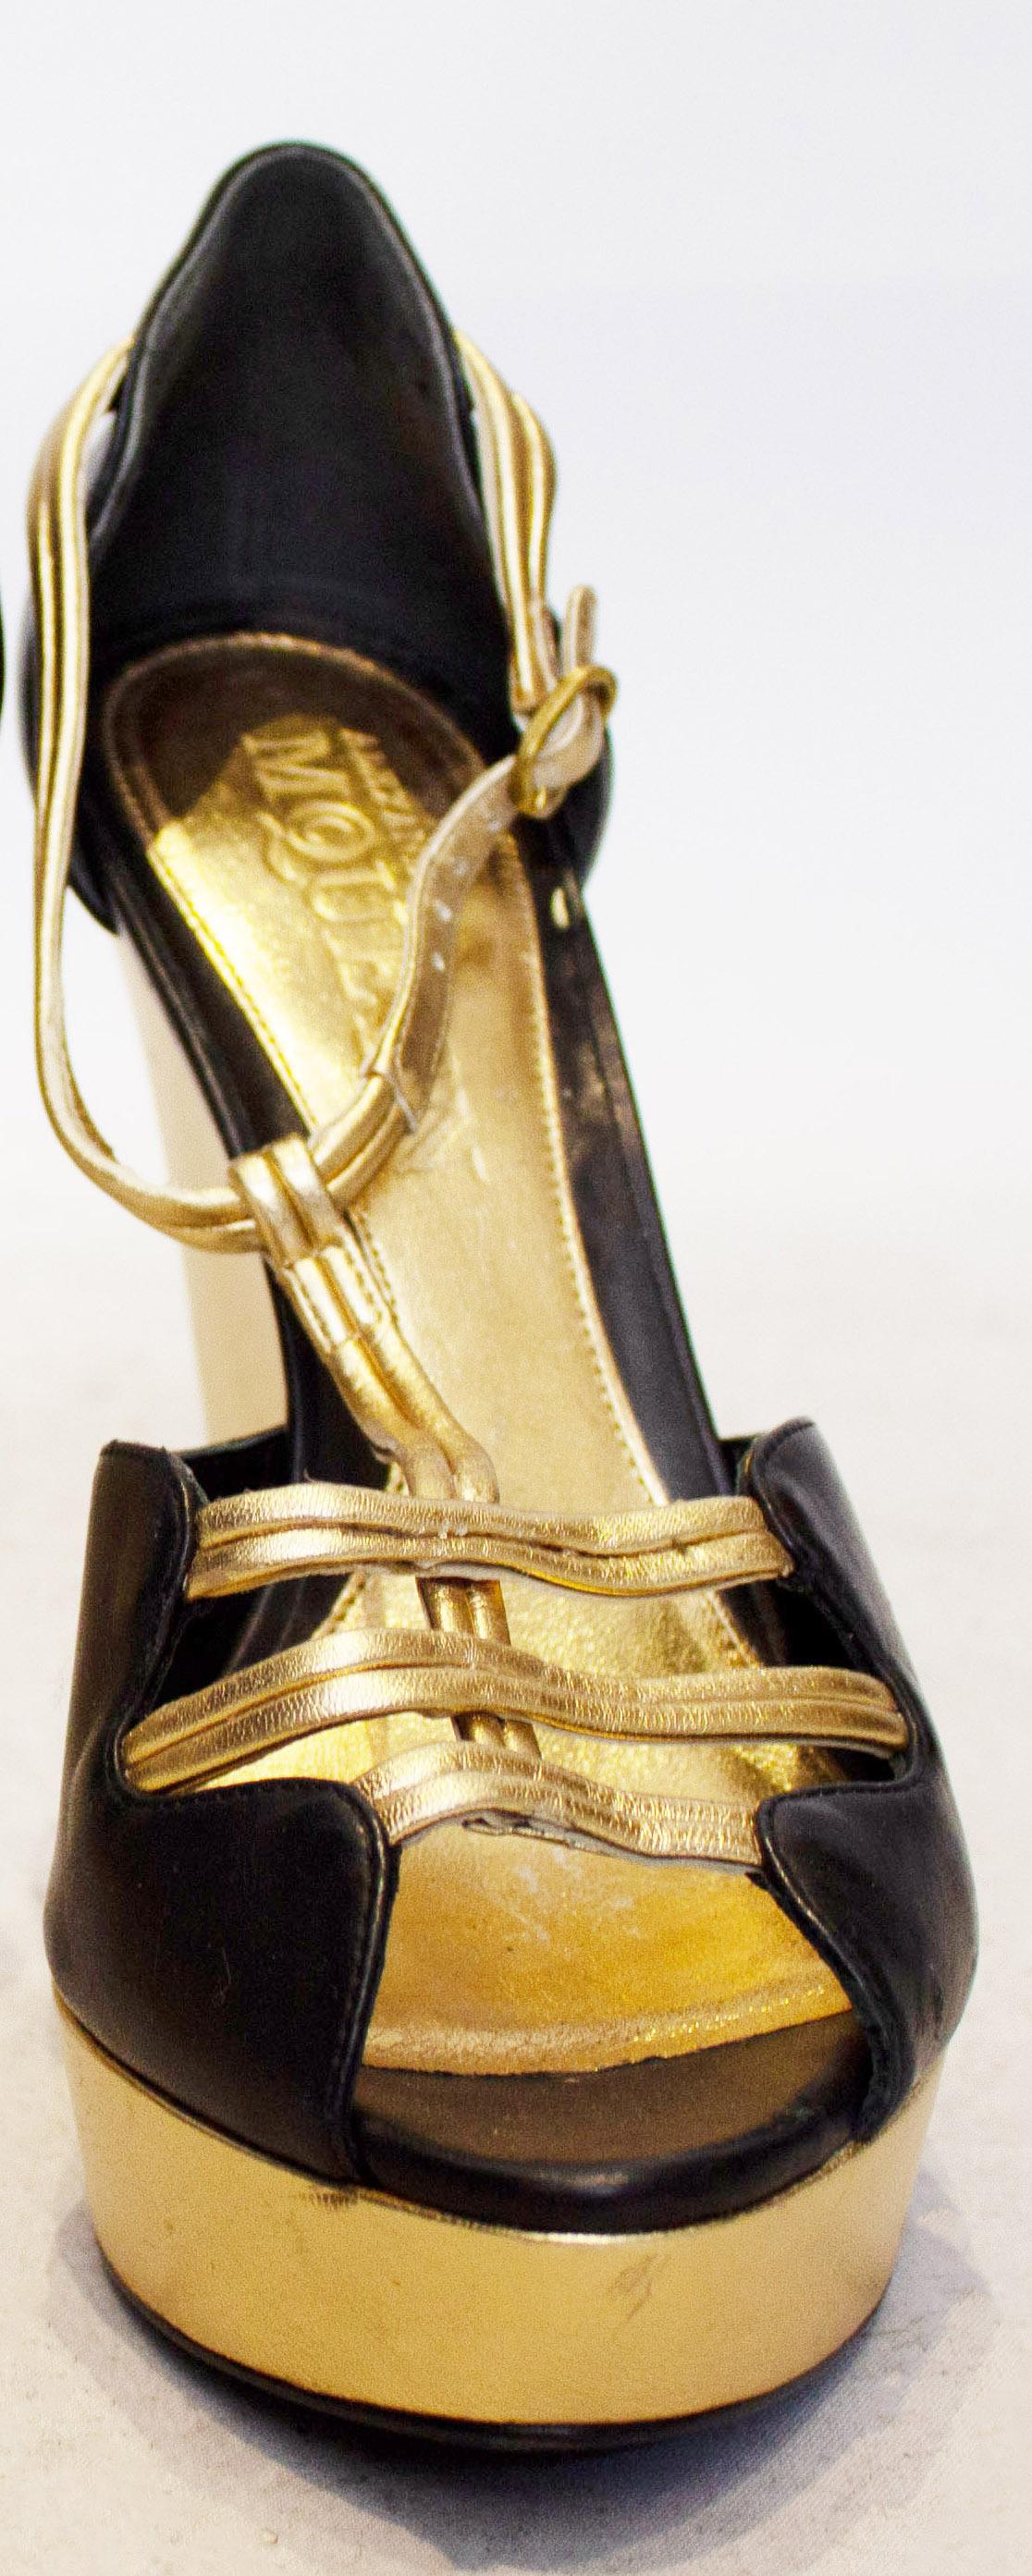 alexander mcqueen shoes black and gold